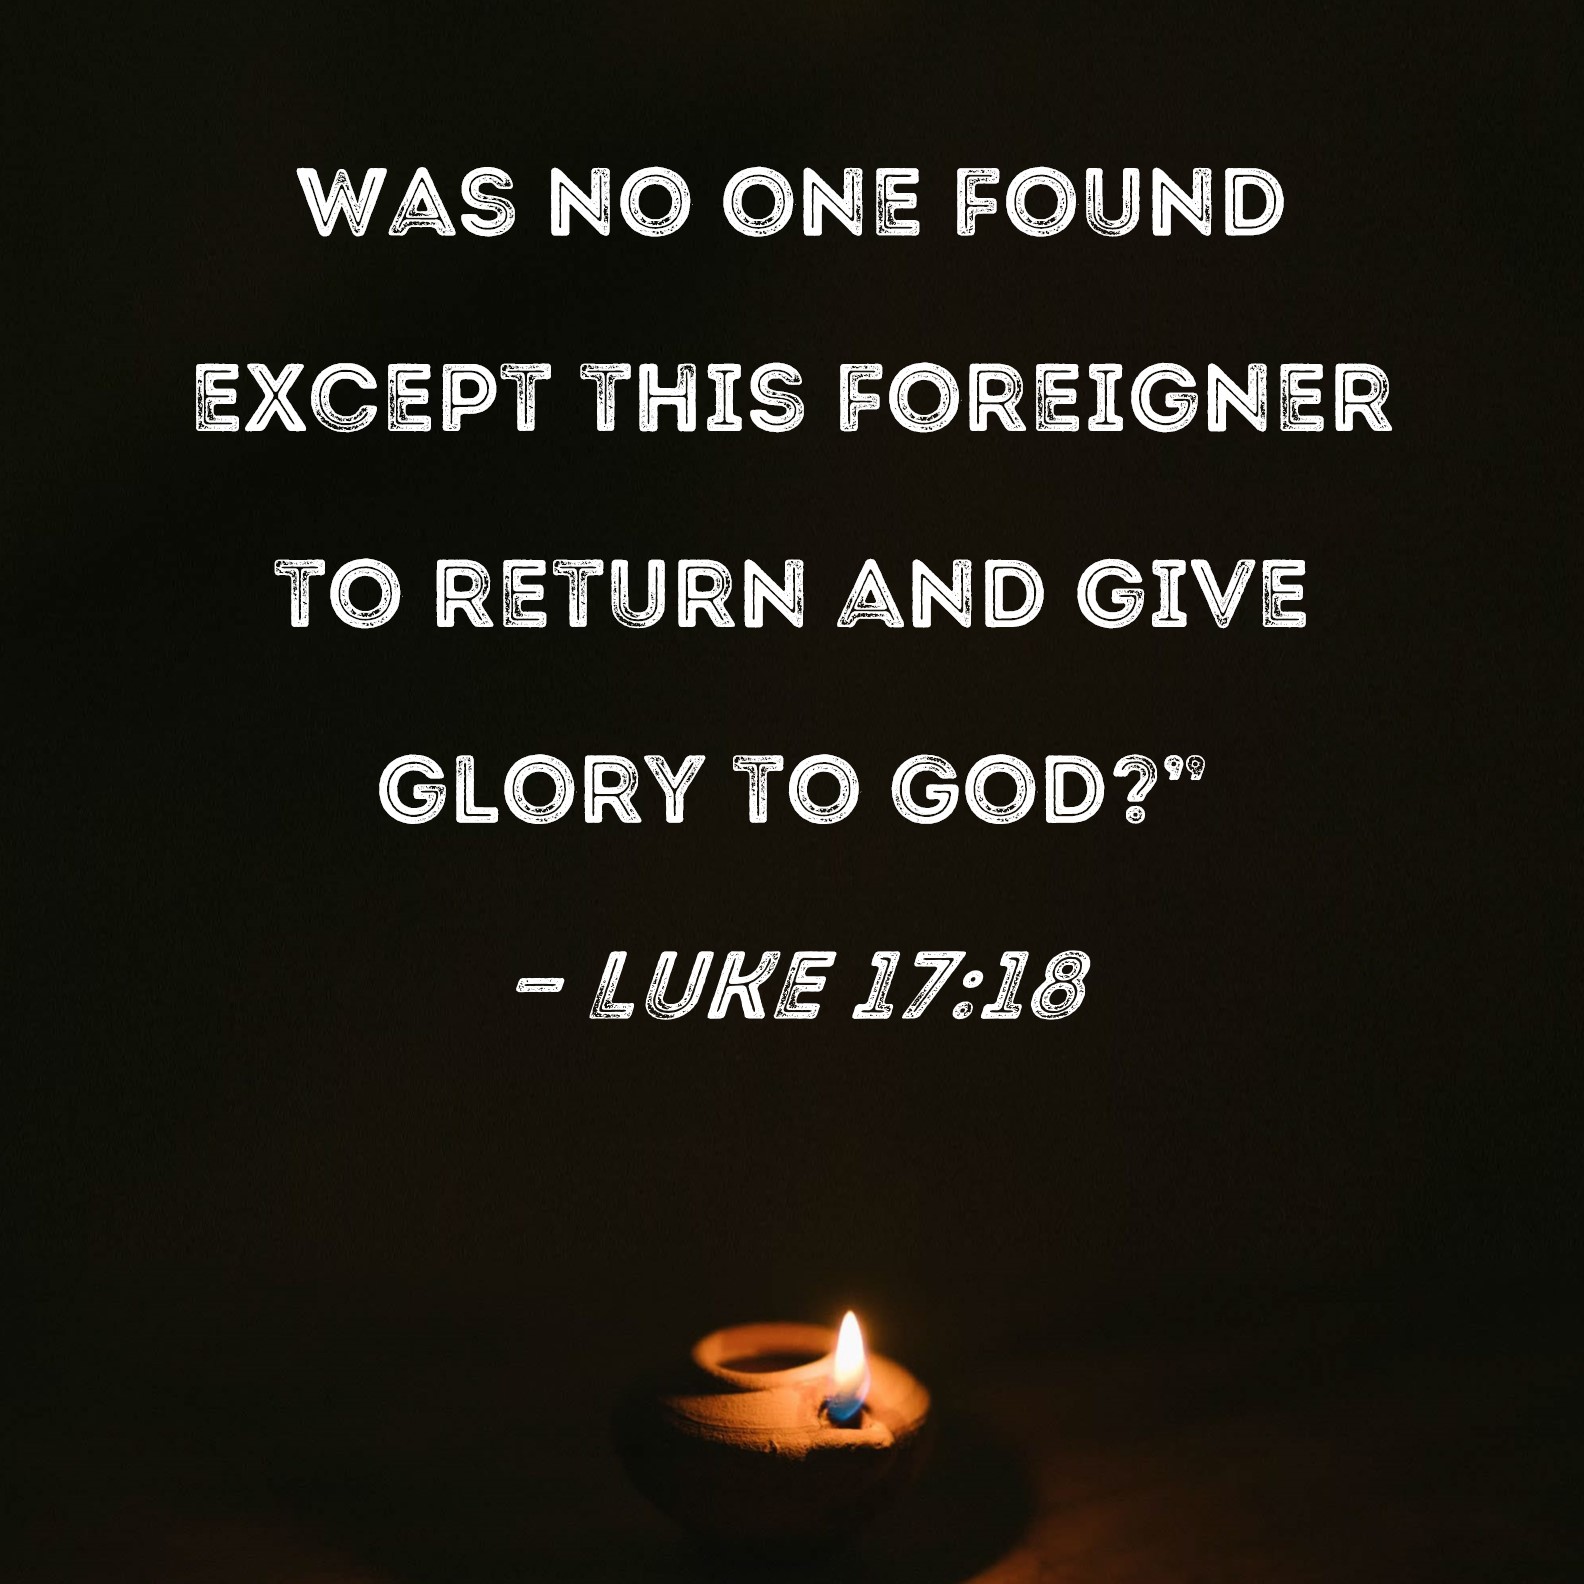 Luke 17:18 Was no one found except this foreigner to return and give glory  to God?"